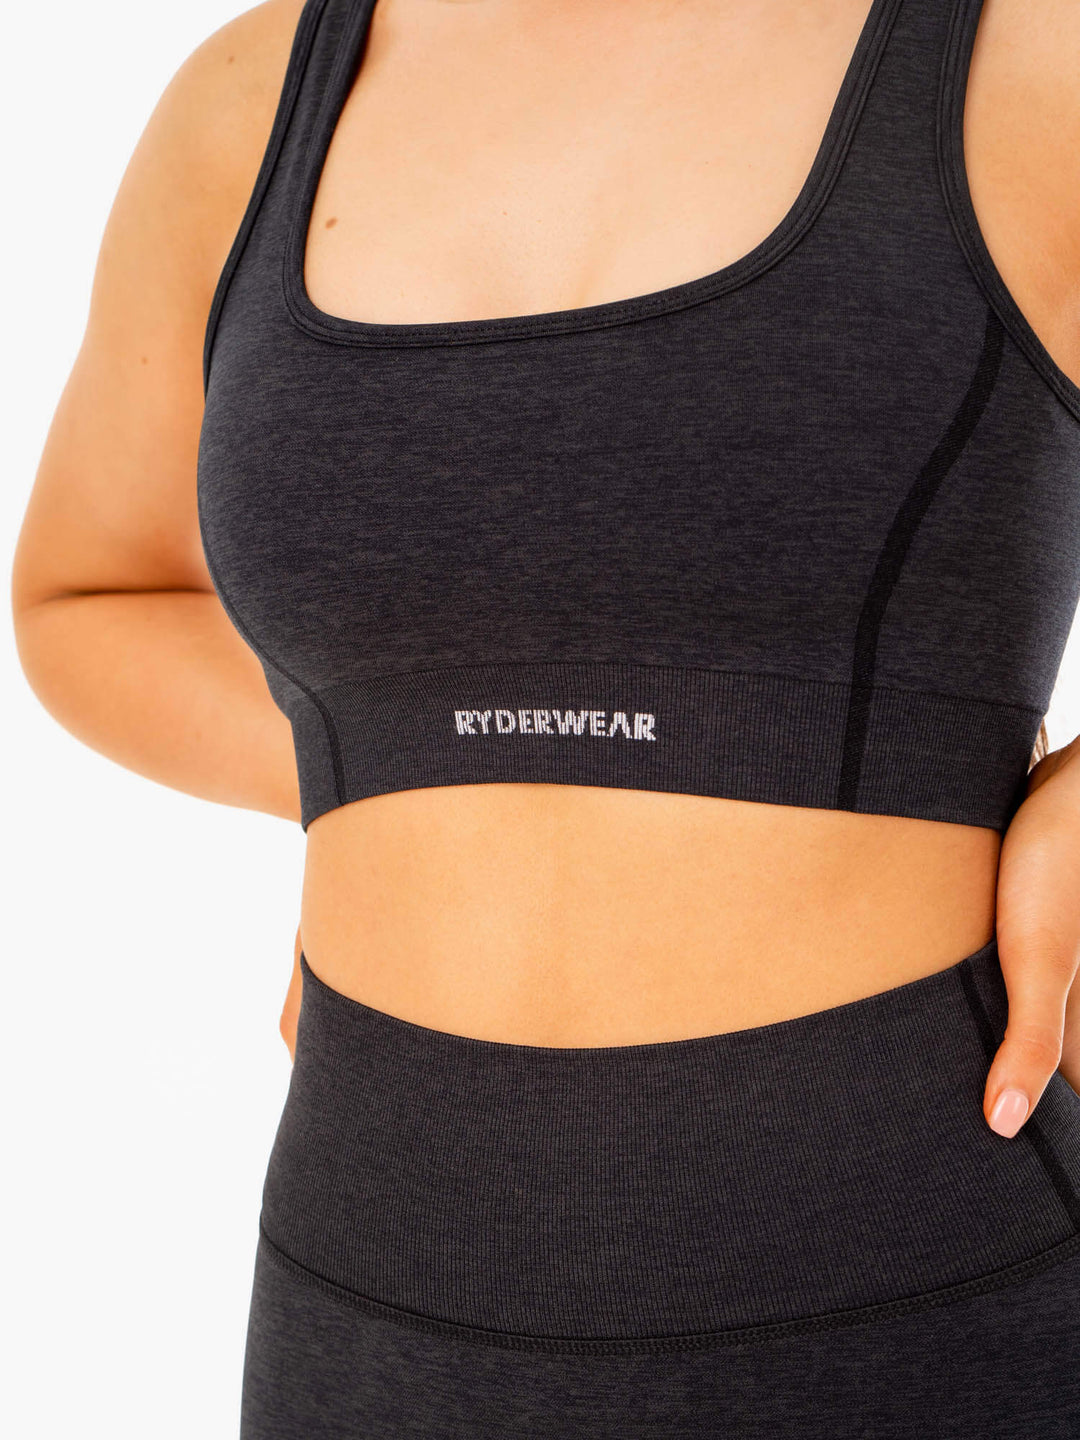 Ryderwear - Love your emotional support water bottle? Try a high-support sports  bra 🤝🥲⁠ Shop our Heighten Sports Bra www.ryderwear .com/collections/shop?q=heighten+sports+bra #Ryderwear